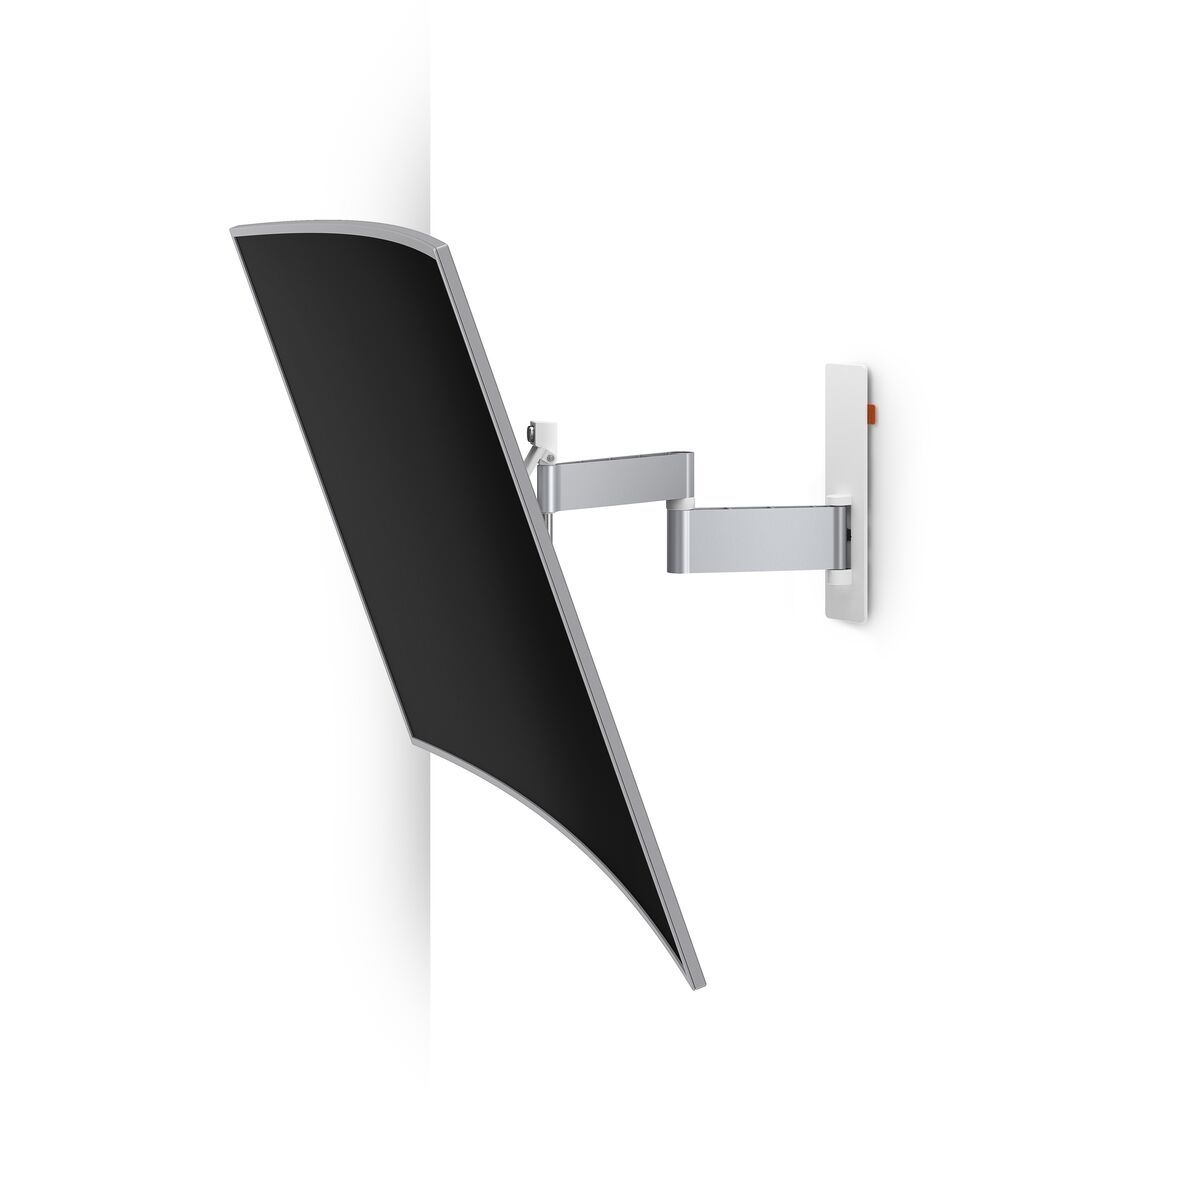 Vogel's WALL 2345 Full-Motion TV Wall Mount (white) - Suitable for 40 up to 65 inch TVs - Full motion (up to 180°) - Tilt up to 20° - Application